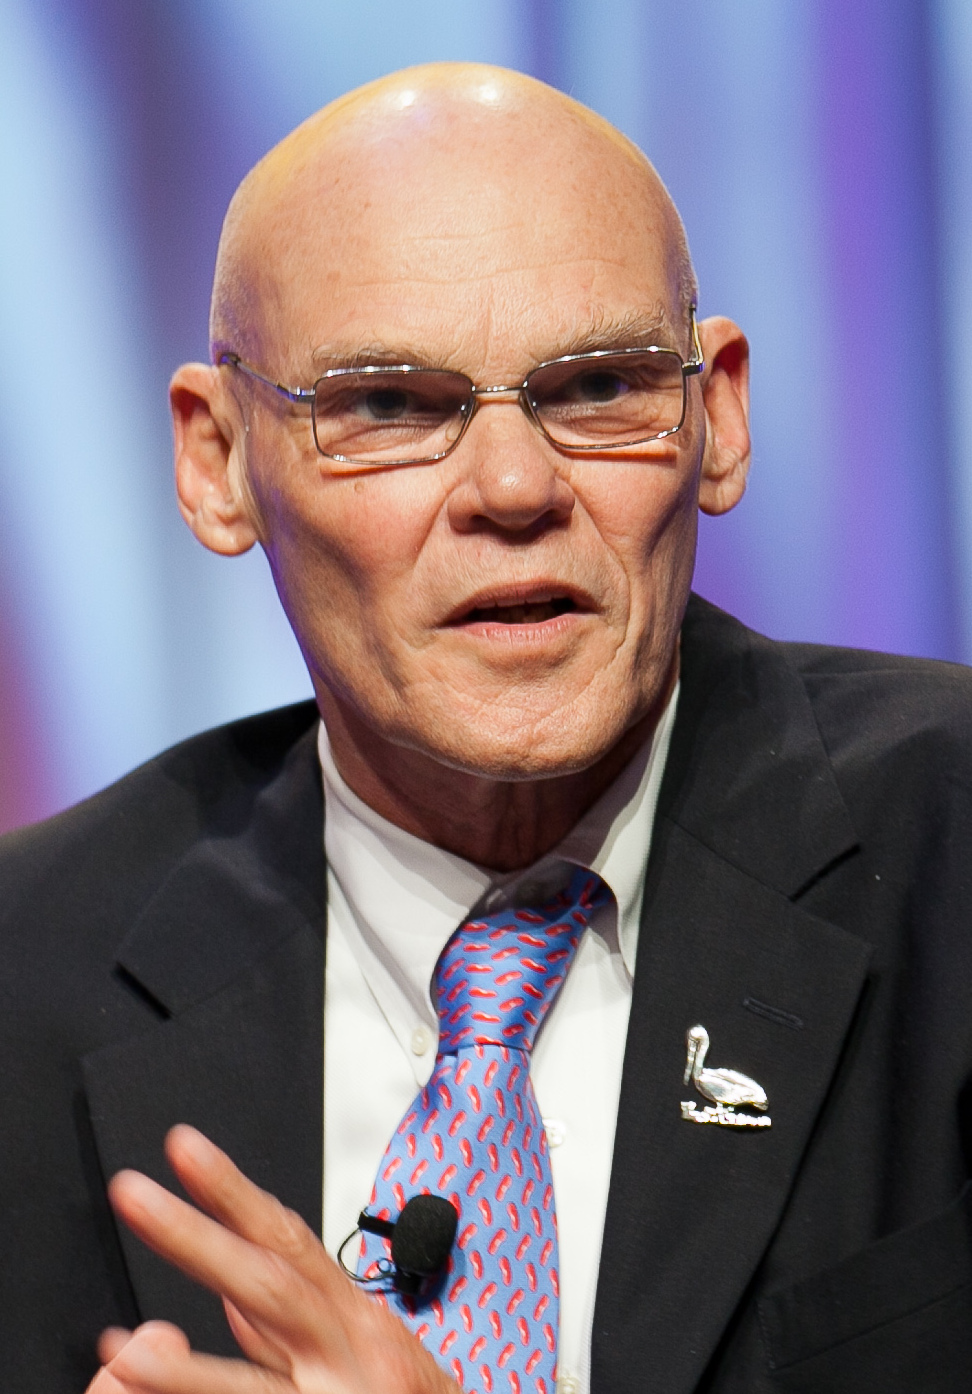 Carville in 2011